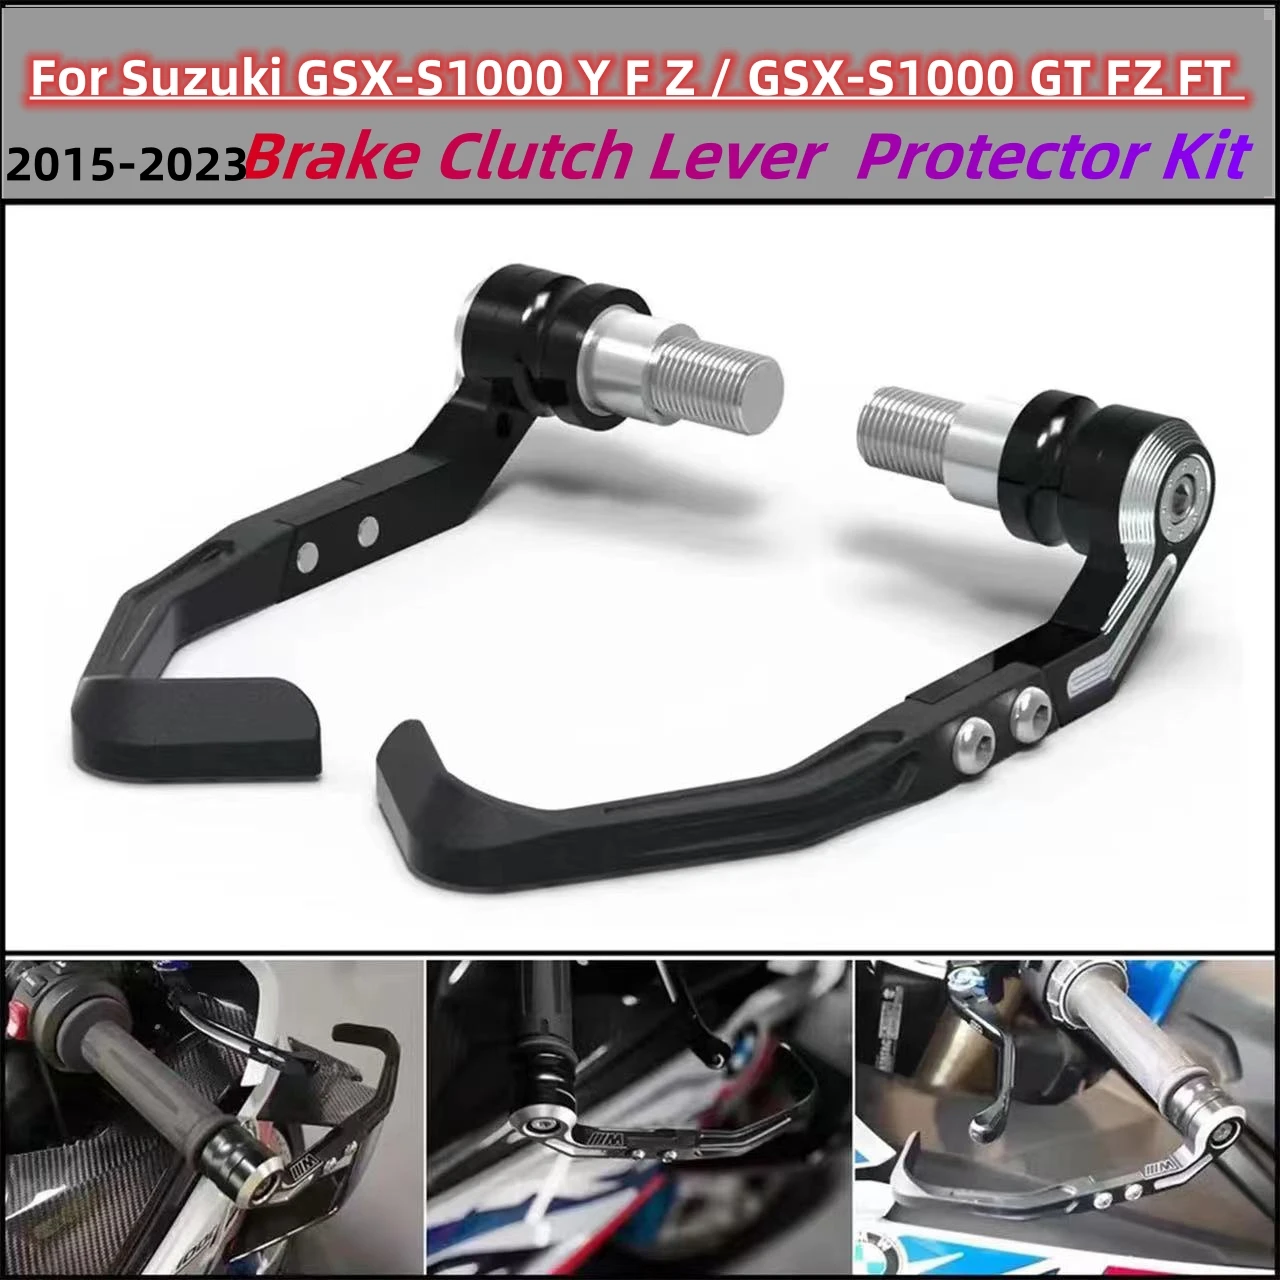 

Motorcycle Brake and Clutch Lever Protector Kit For Suzuki GSX-S1000 Y F Z / GSX-S1000 GT FZ FT 2015-2023